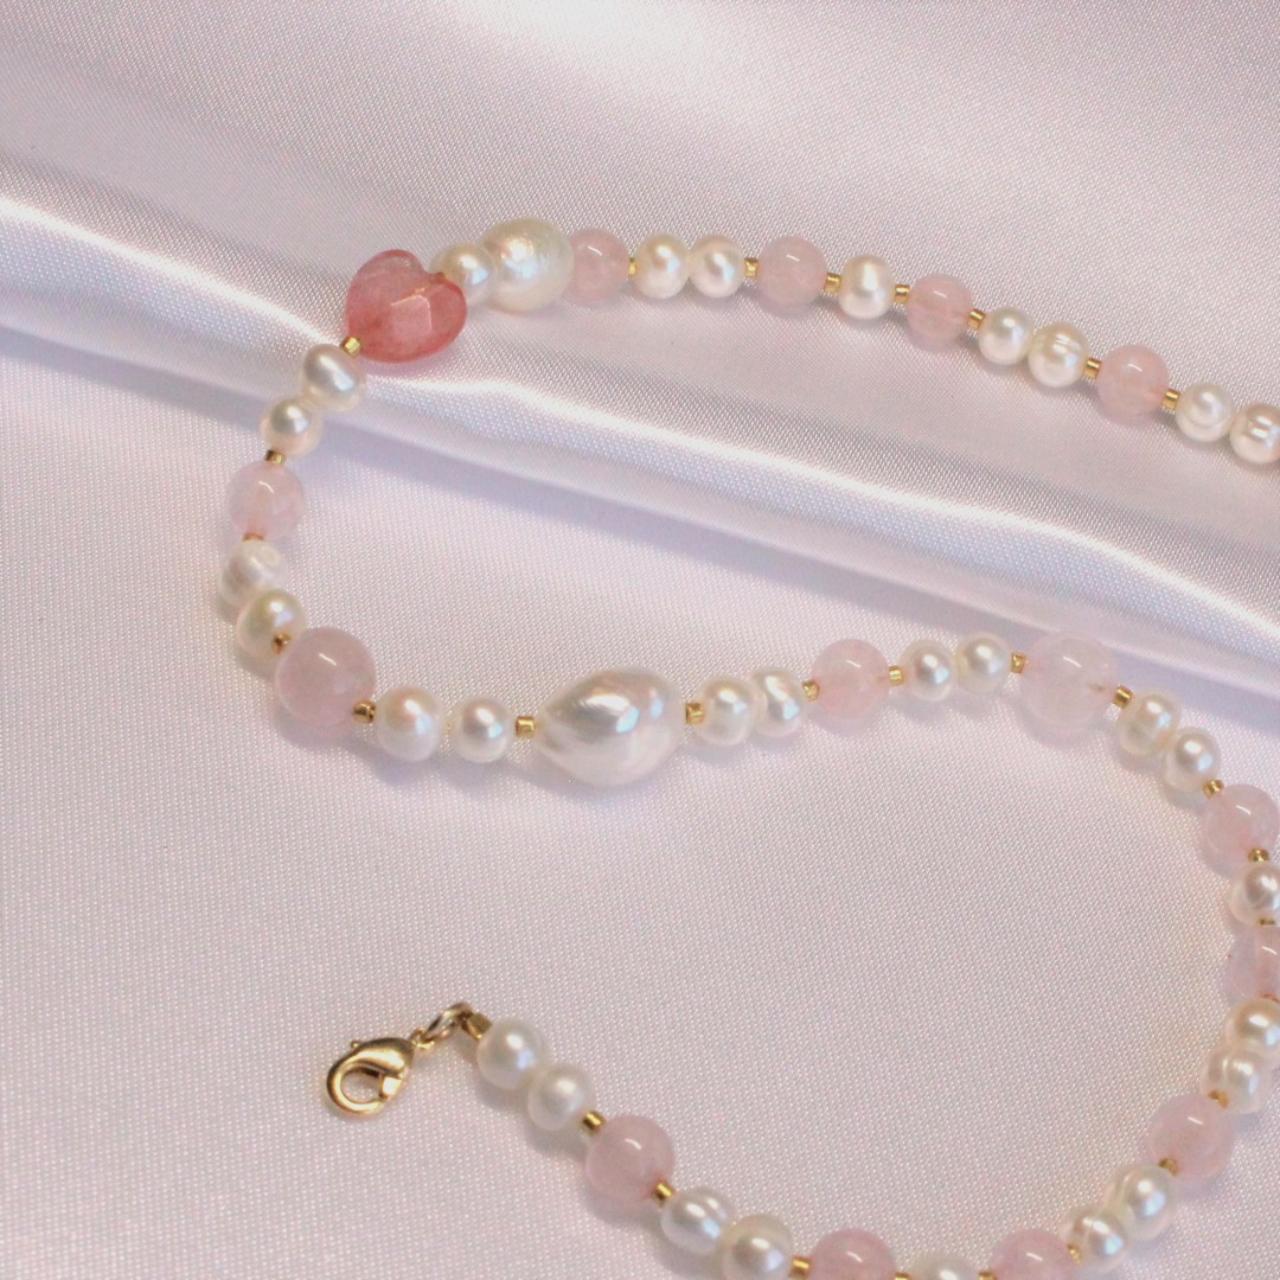 Pearls and Rose Quartz beaded Necklace This... - Depop